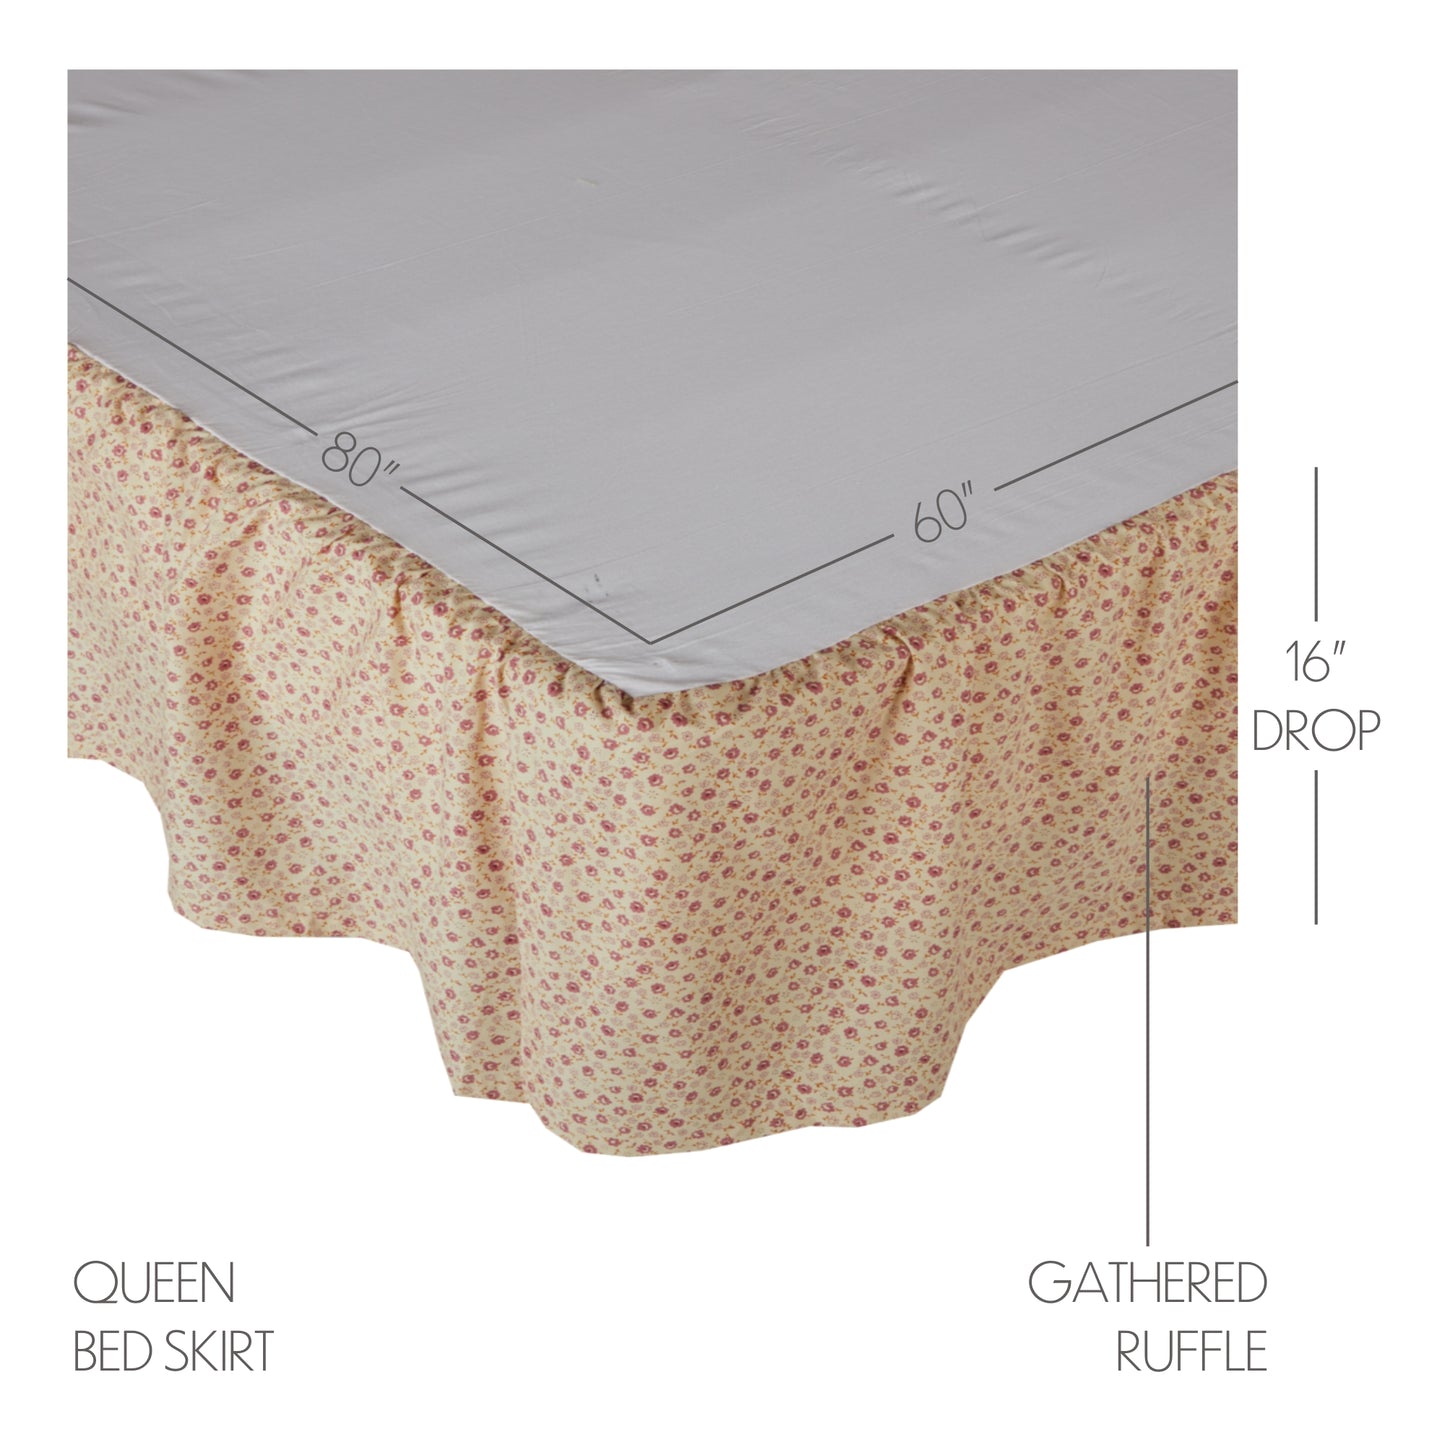 70077-Camilia-Queen-Bed-Skirt-60x80x16-image-3